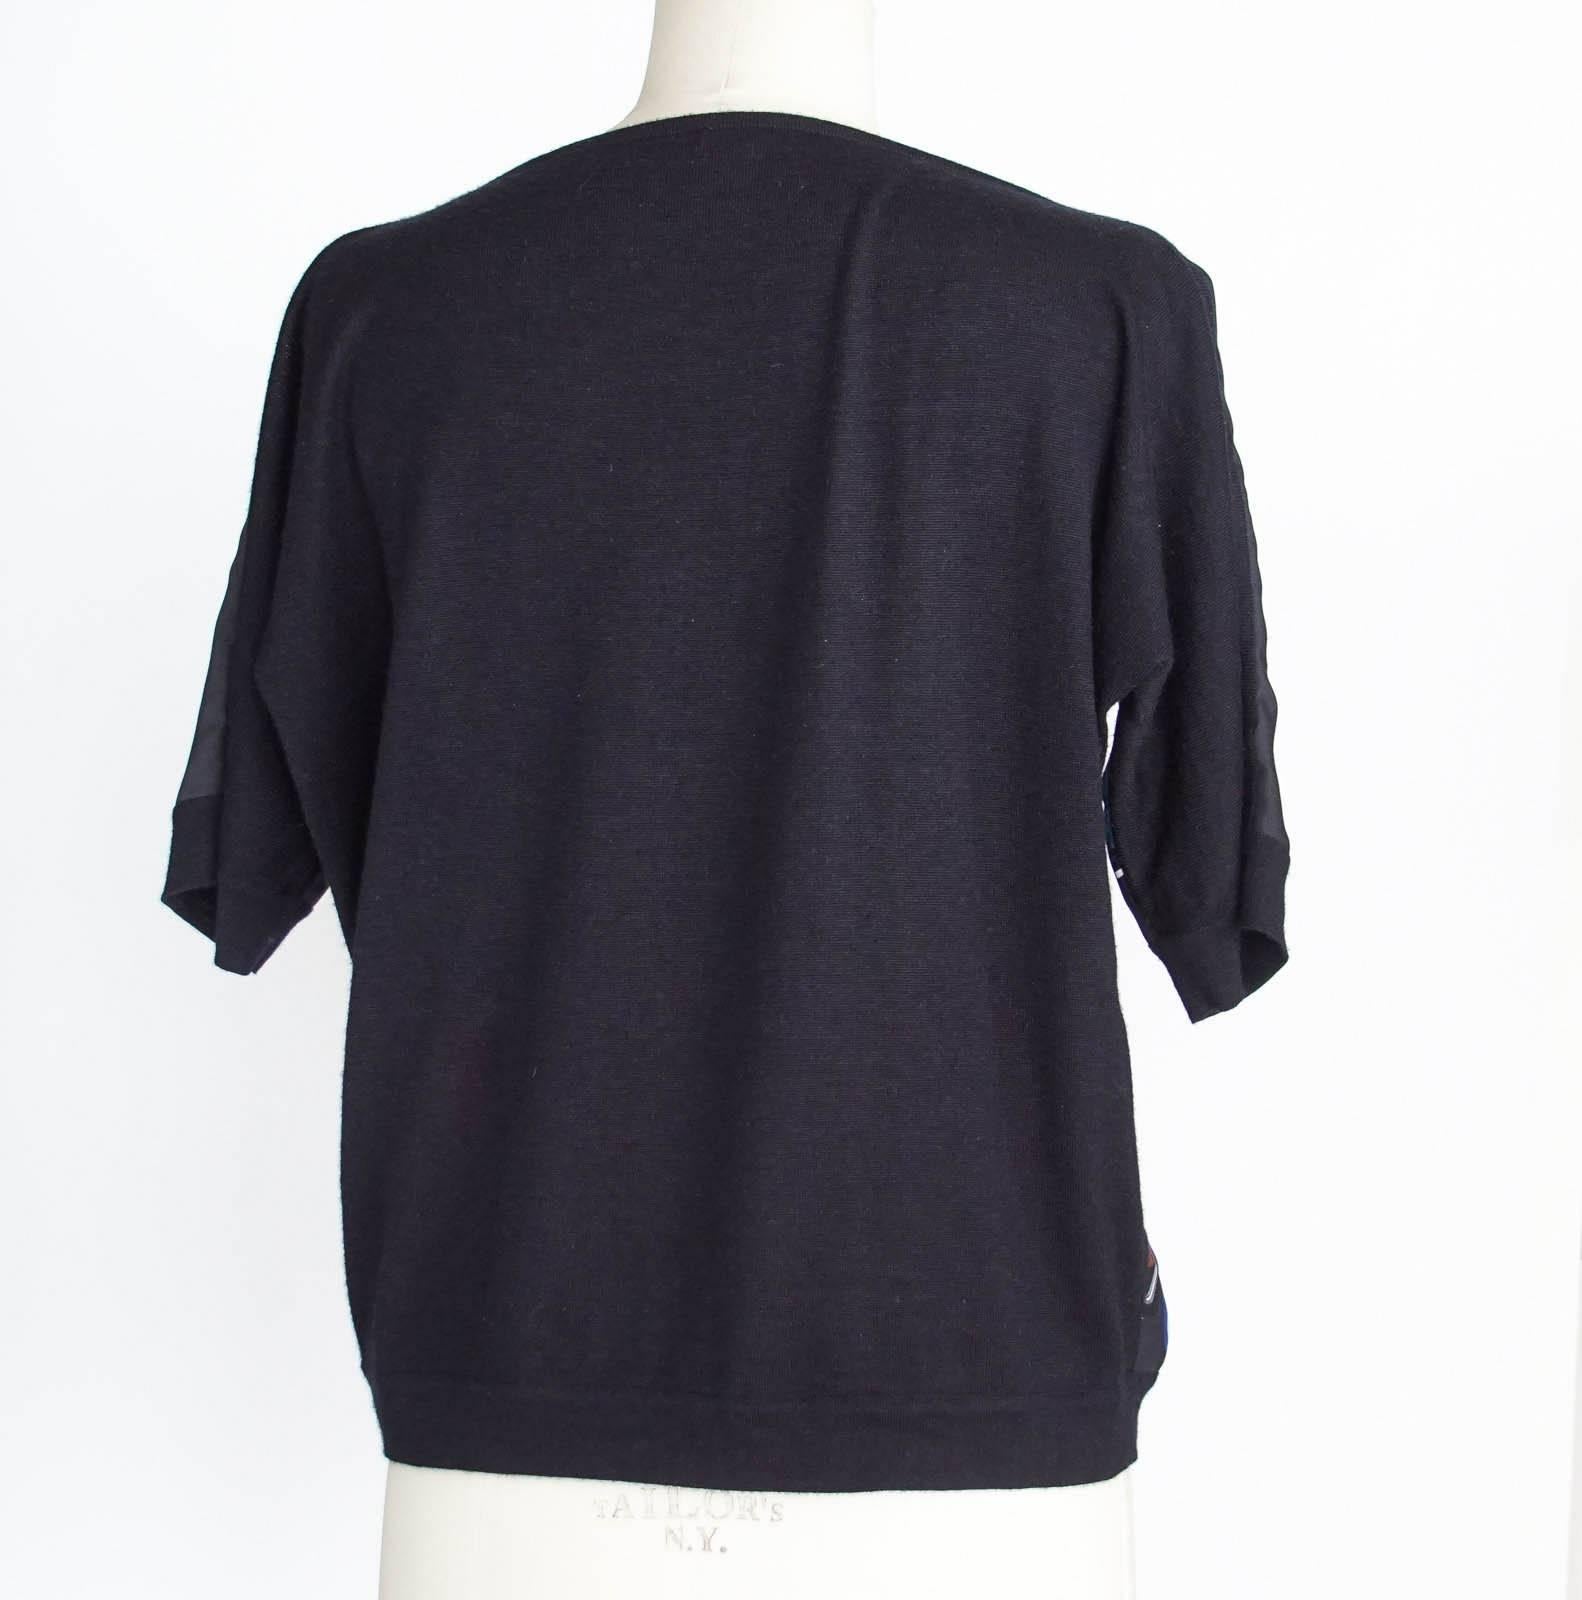 Black Hermes Top / Shirt / Sweater Silk and Cashmere Braces Print 42